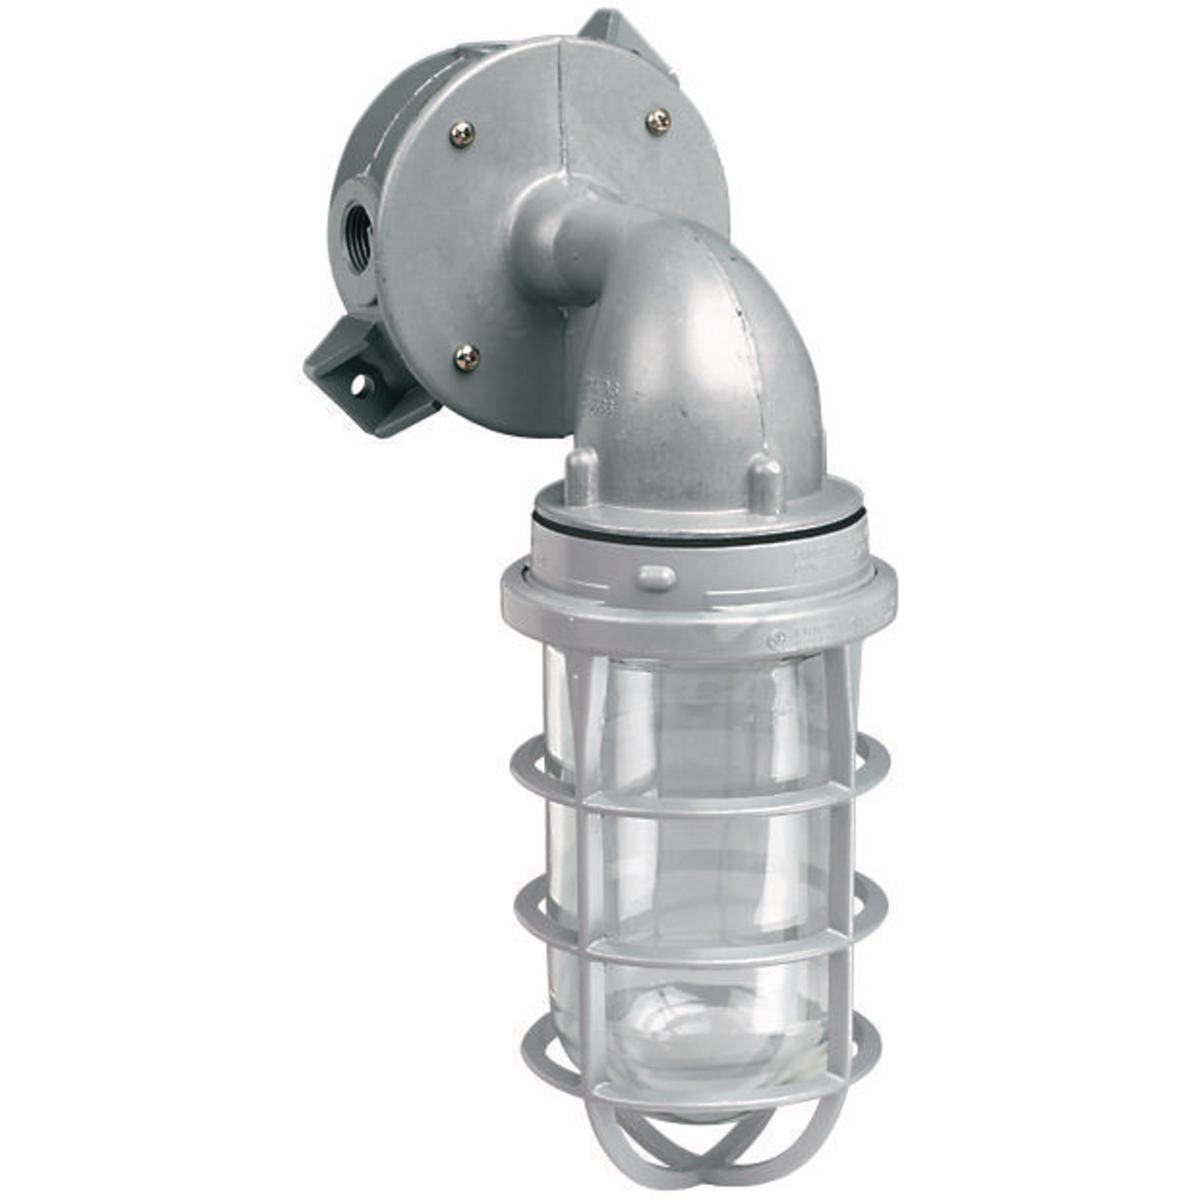 Hubbell VFBG-2-200 200W V Series Incandescent 3/4" Wall Mount to VBC Splice Box  ; Electrostatically applied epoxy/polyester finish ; Modular design ; Hubs are threaded for attachment to conduit ; Set screws in pendant fixture ; Copper-free aluminum (less than .004%) ; The 